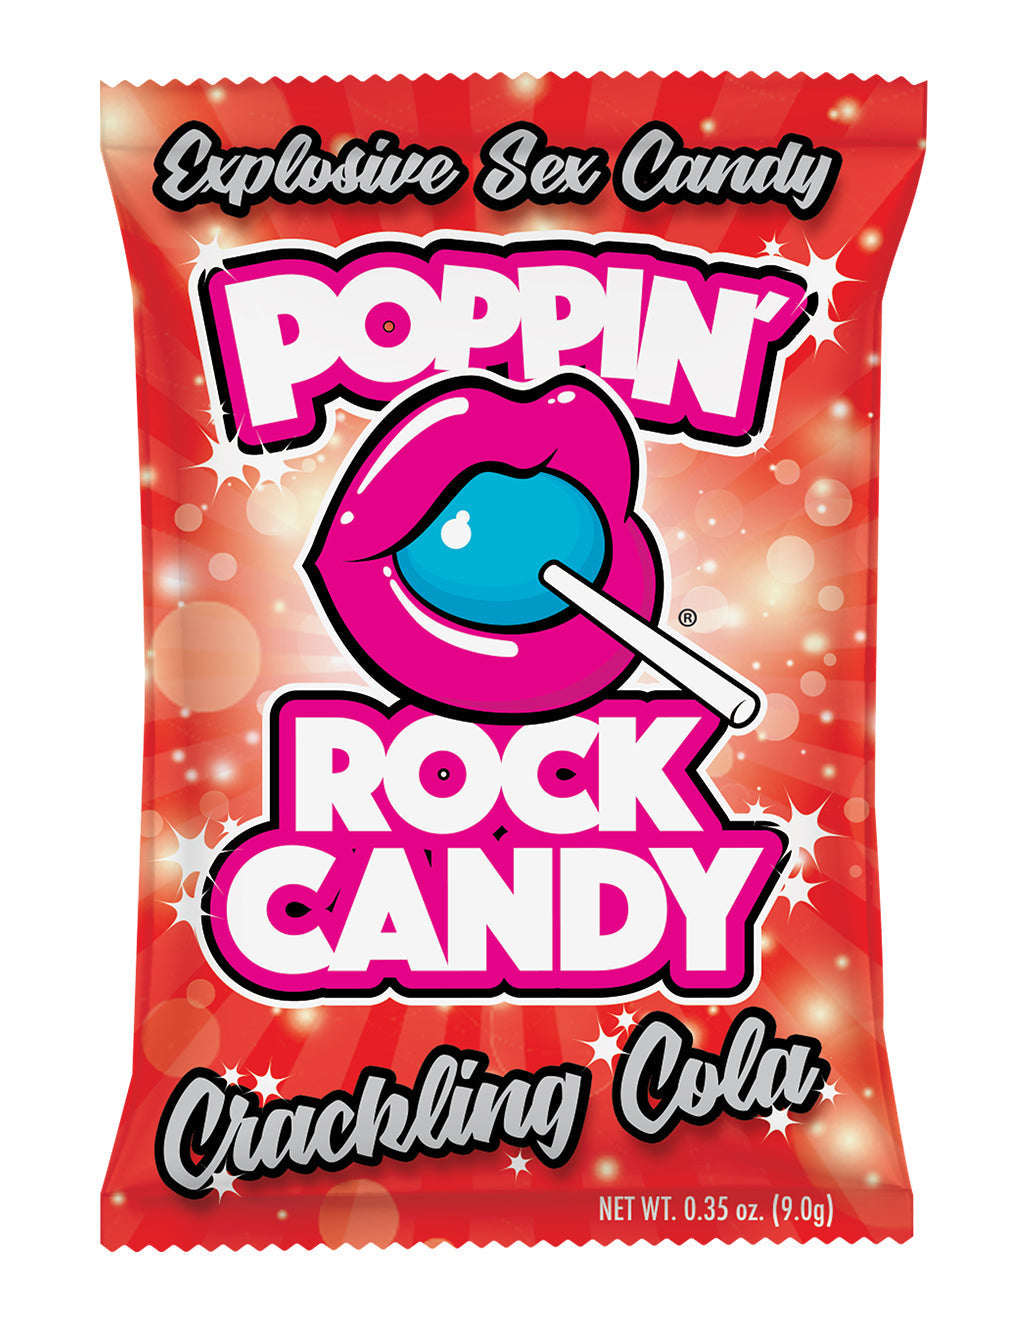 Popping Rock Candy- Crackling Cola- Front